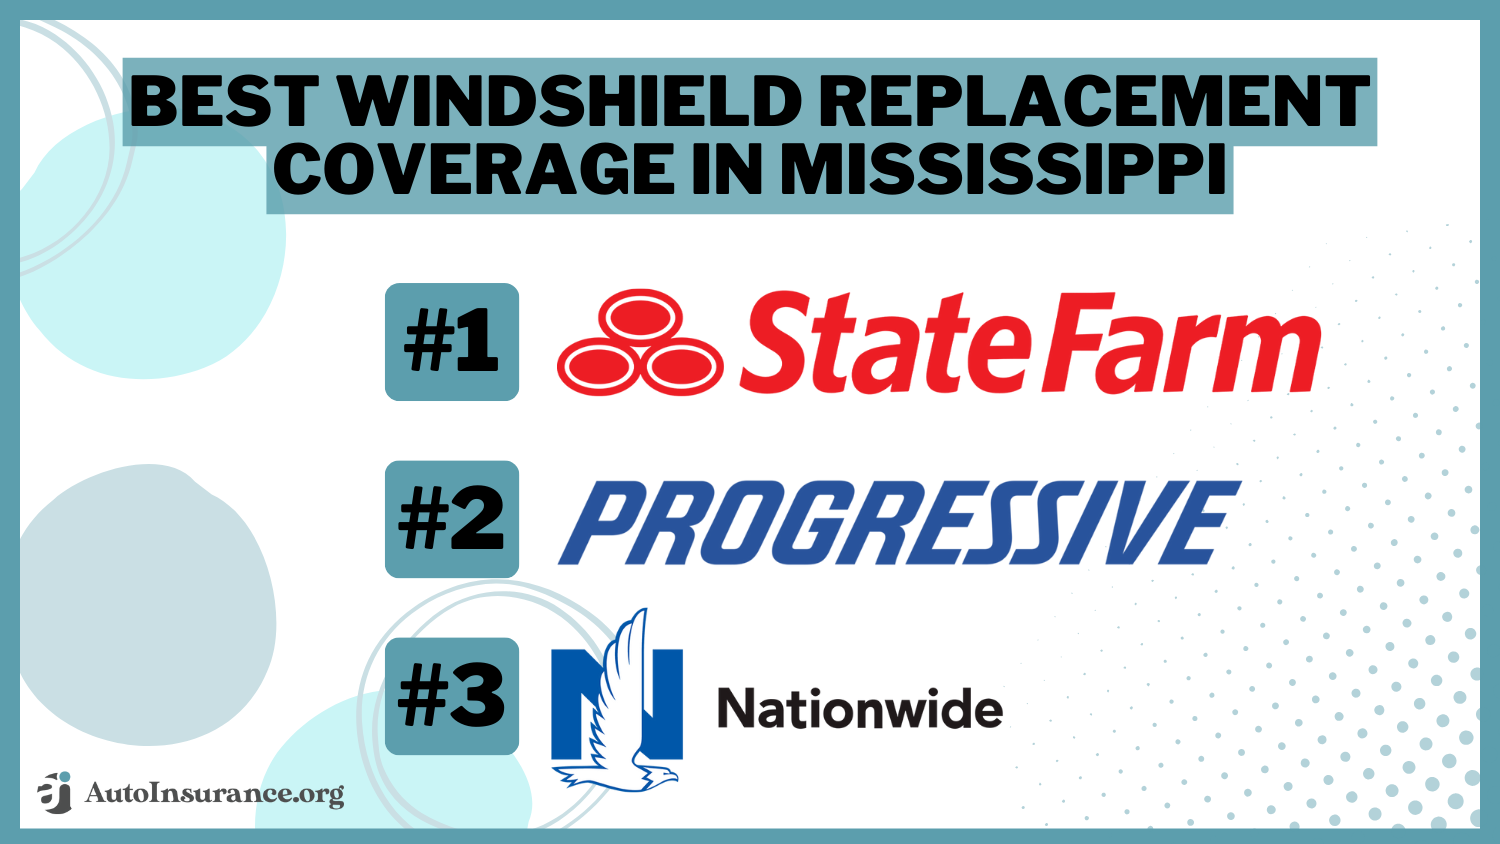 best windshield replacement coverage in Mississippi: State Farm, Progressive, Nationwide